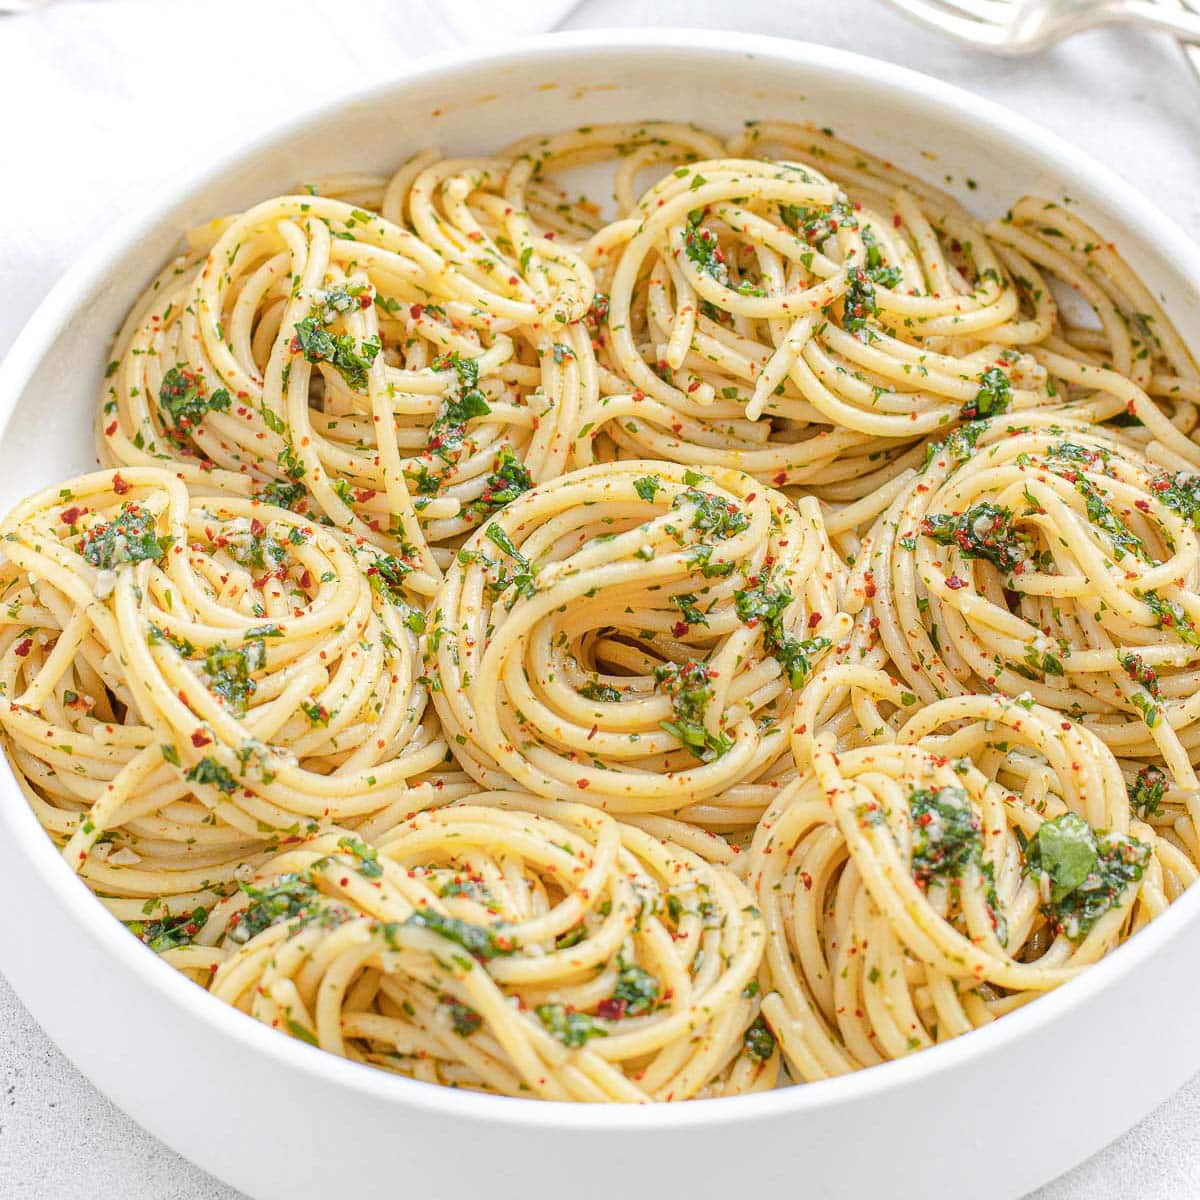 A white bowl filled with spaghetti and pesto sauce